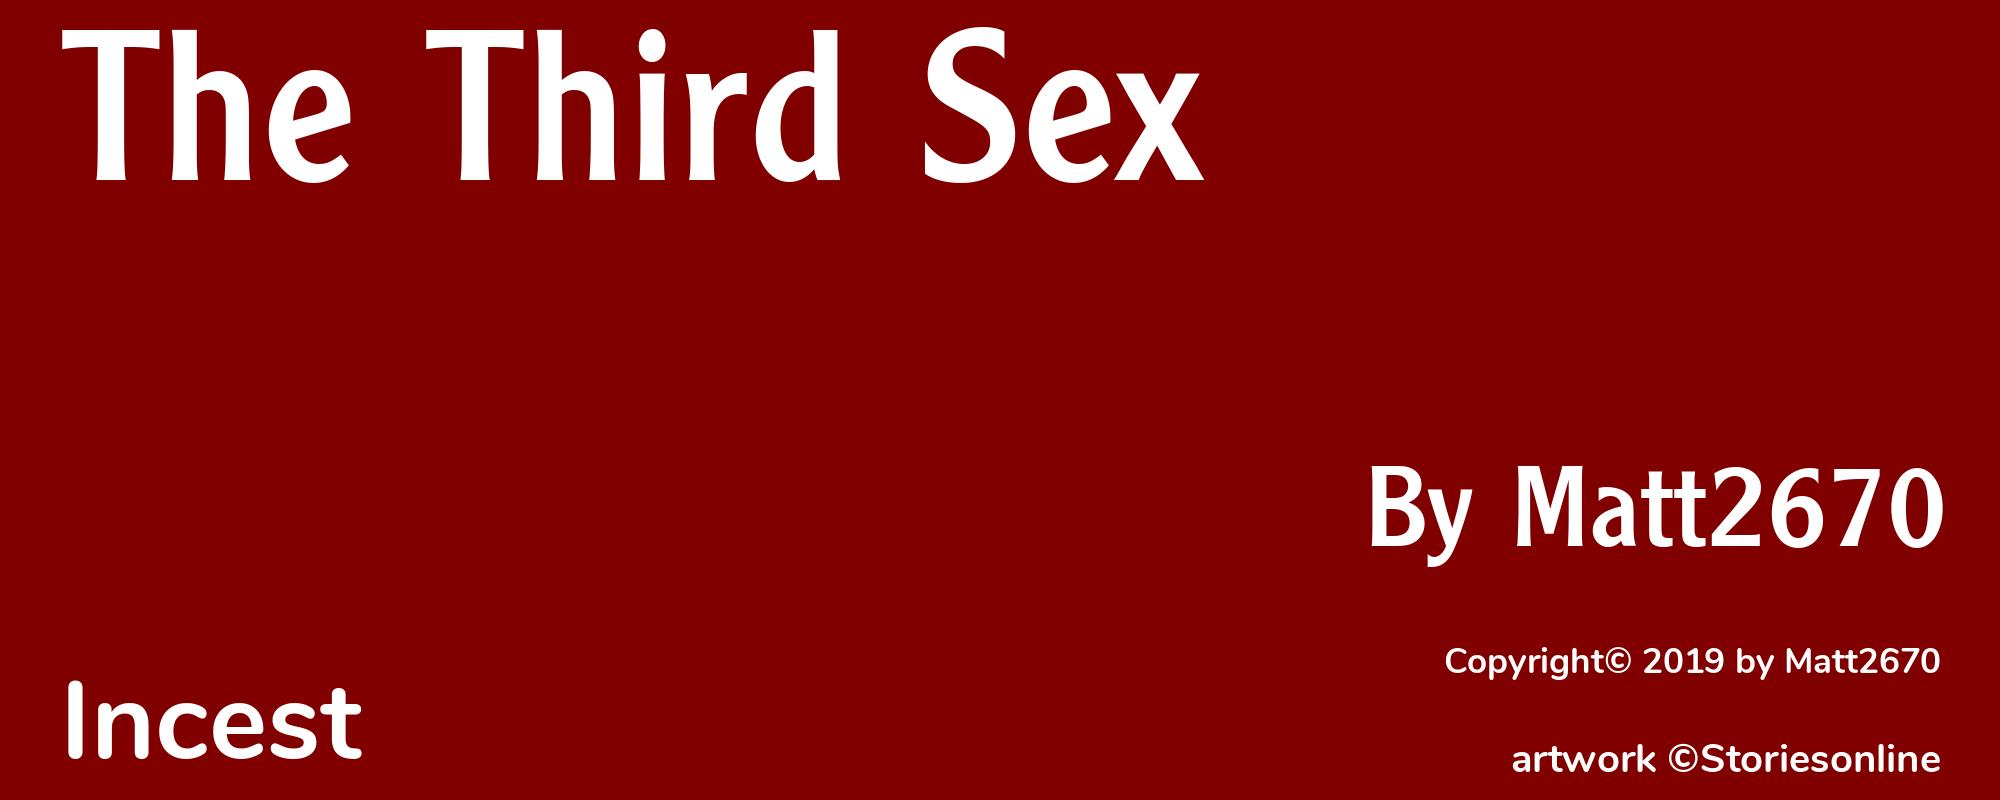 The Third Sex - Cover